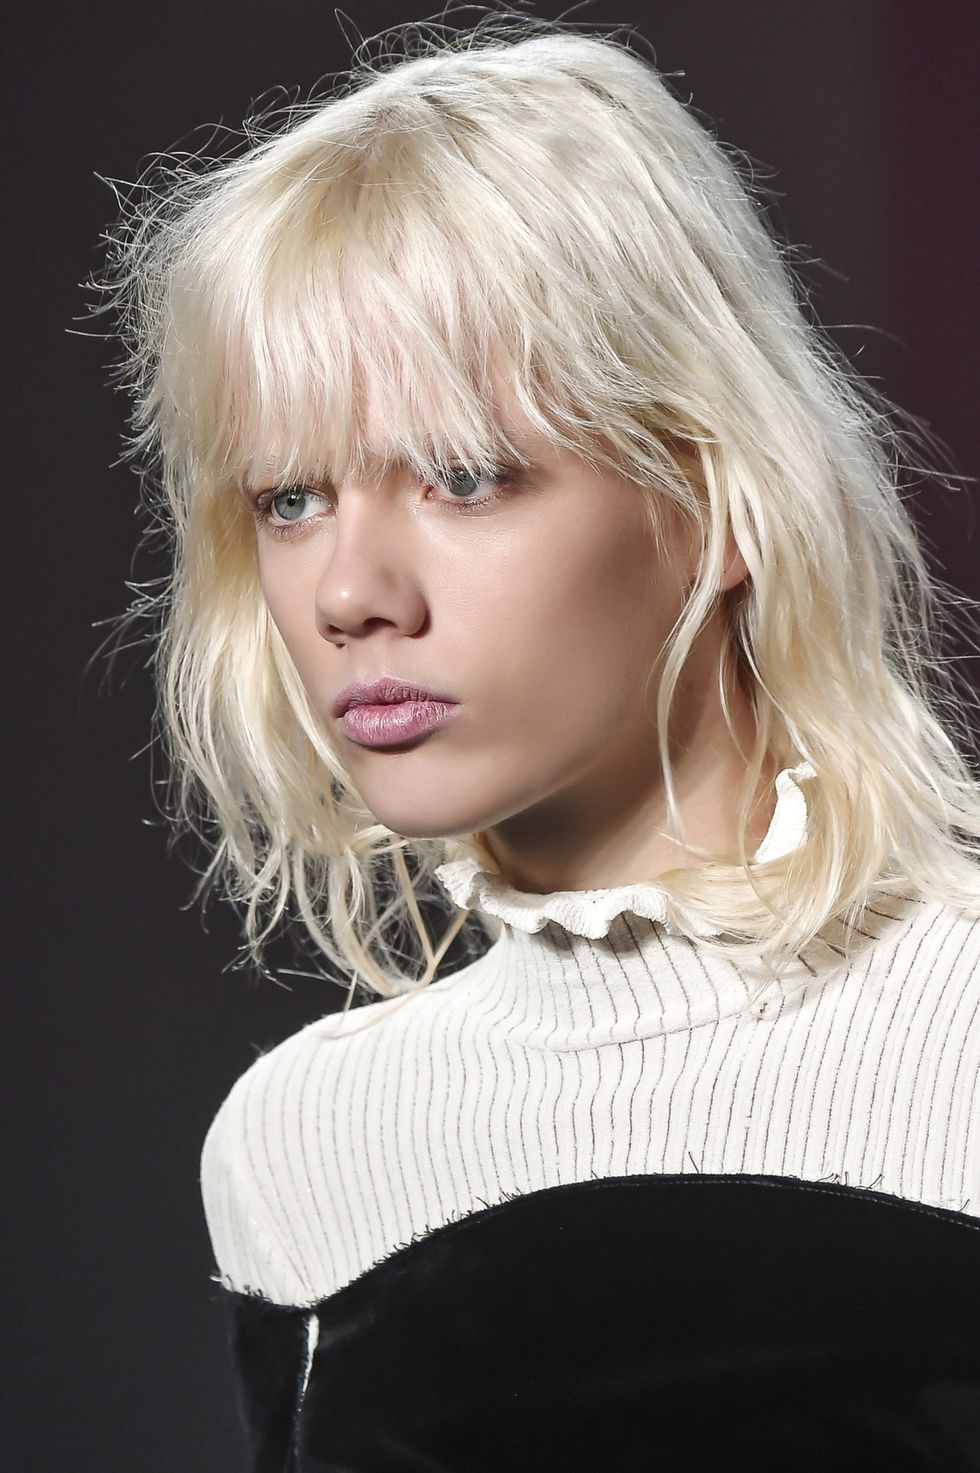 Mouth, Lip, Hairstyle, Chin, Style, Bangs, Step cutting, Blond, Sweater, Fashion model, 